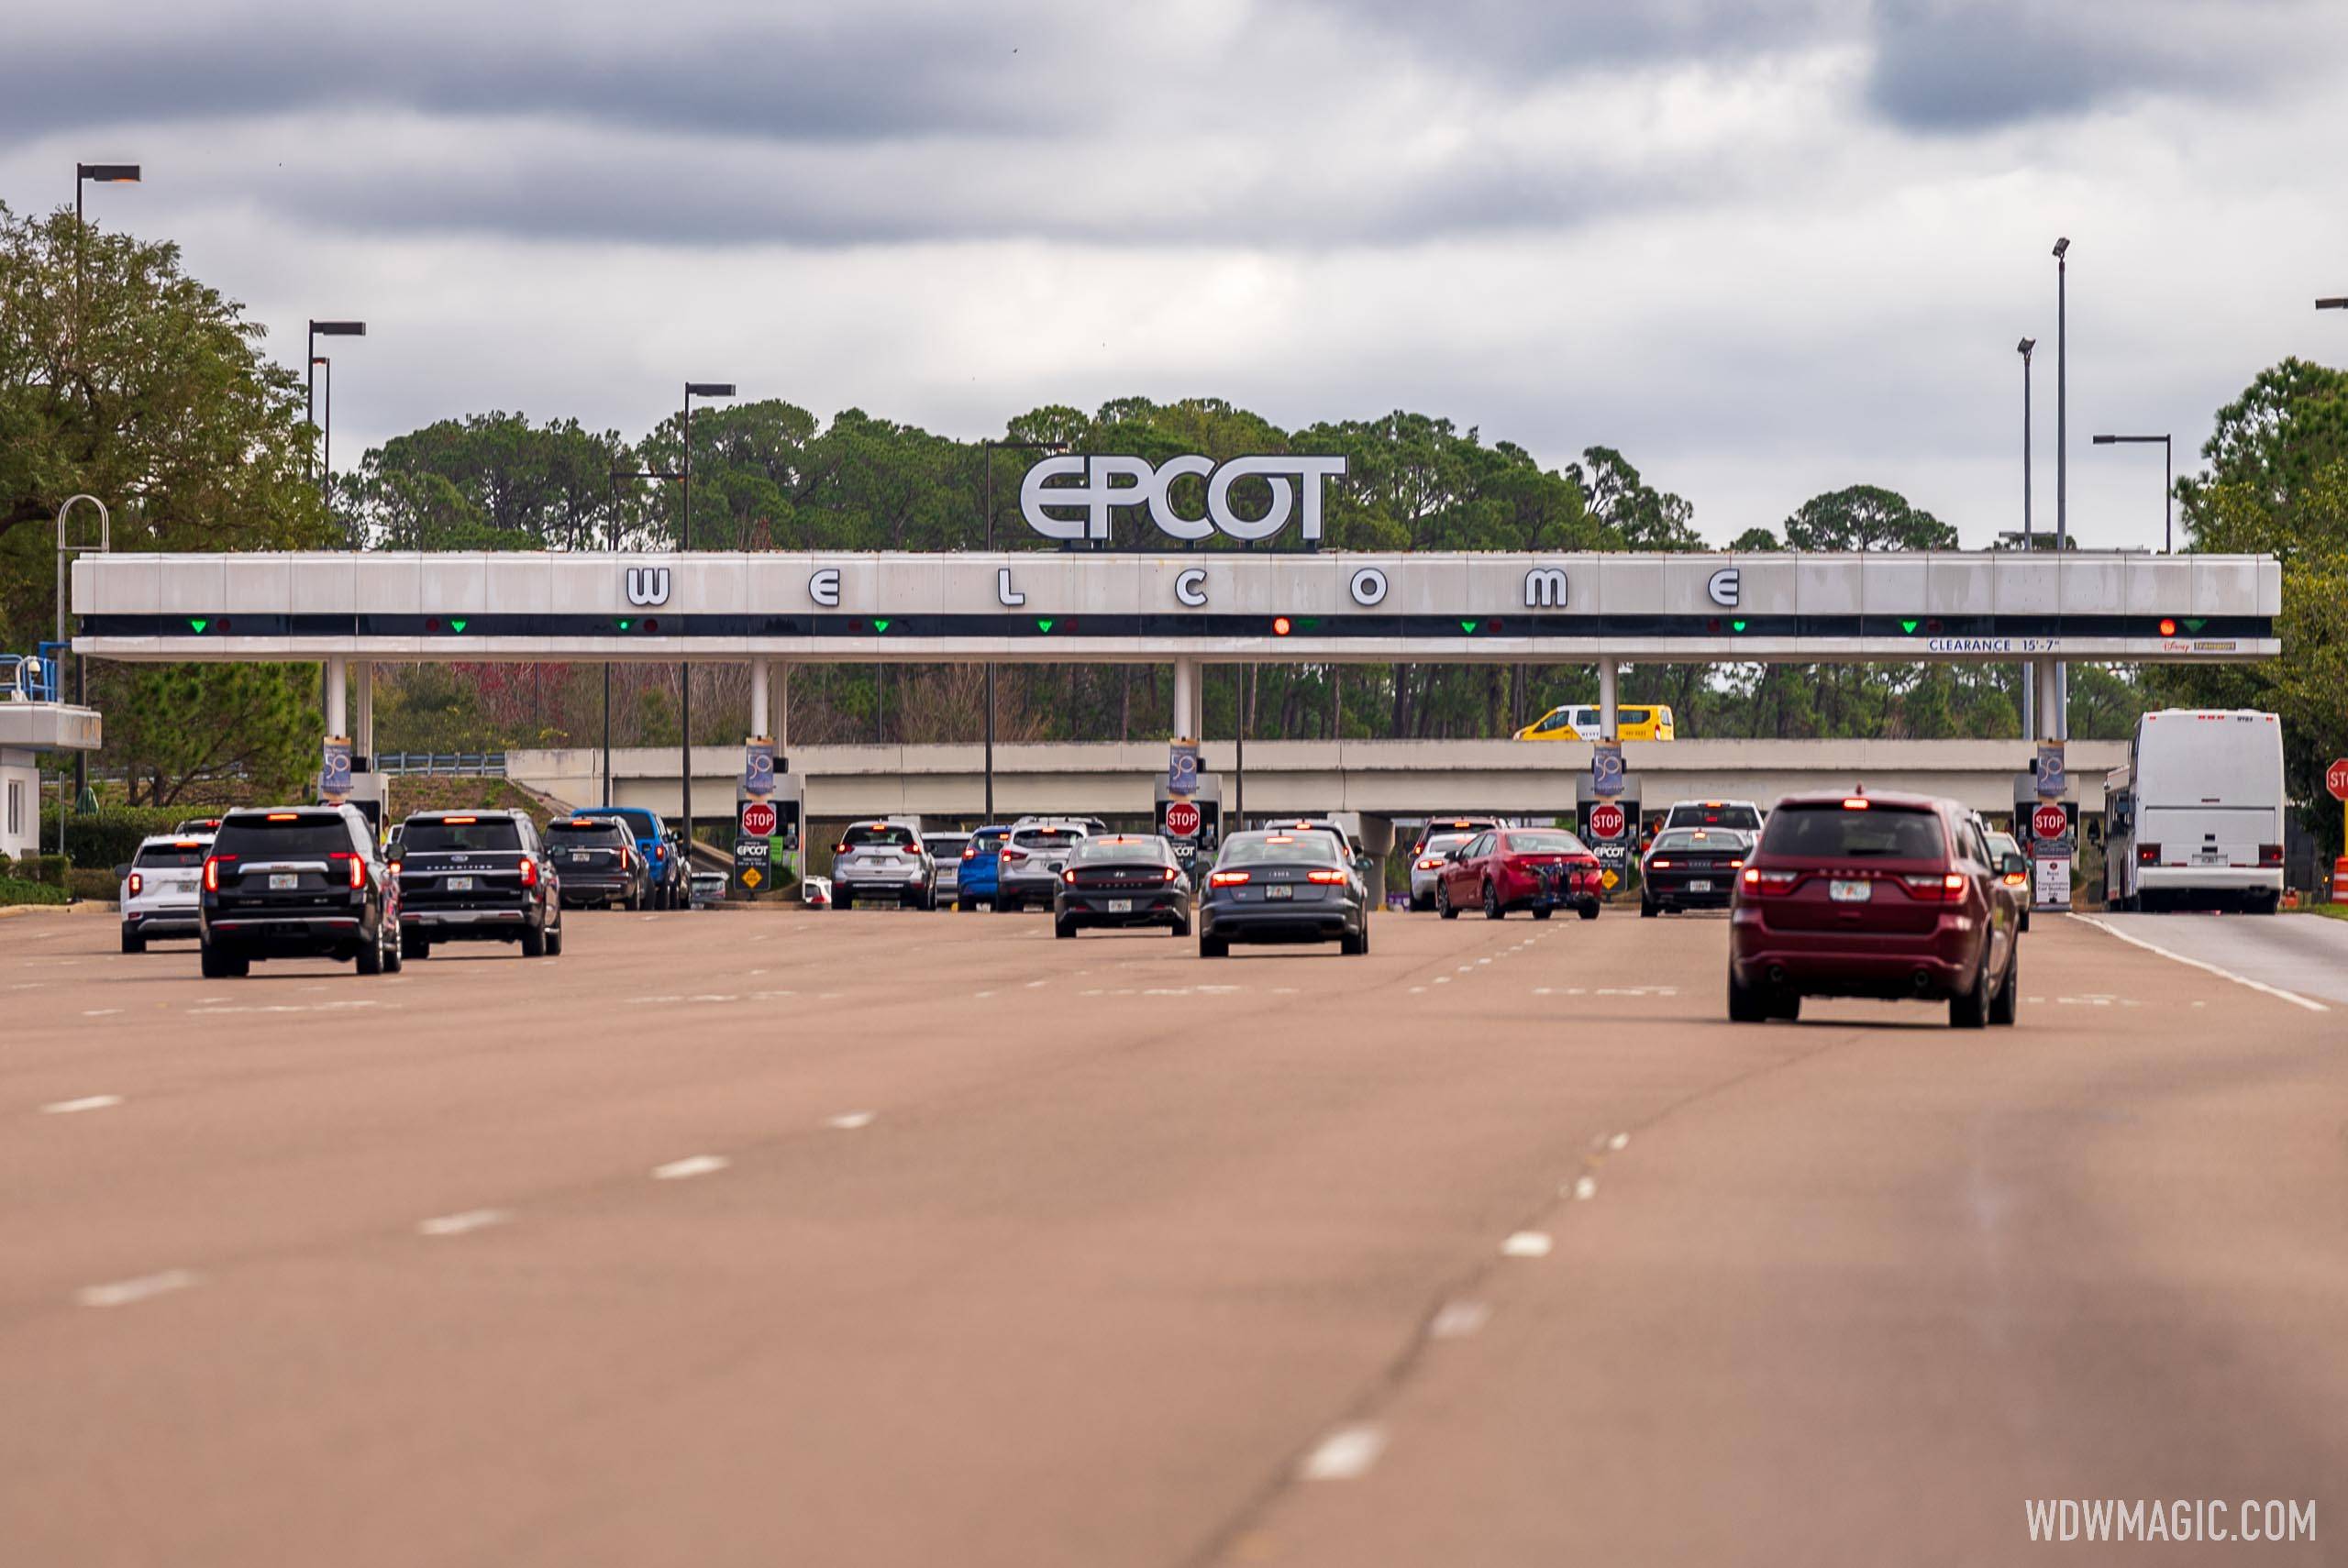 New EPCOT marquee sign added to the EPCOT auto-plaza